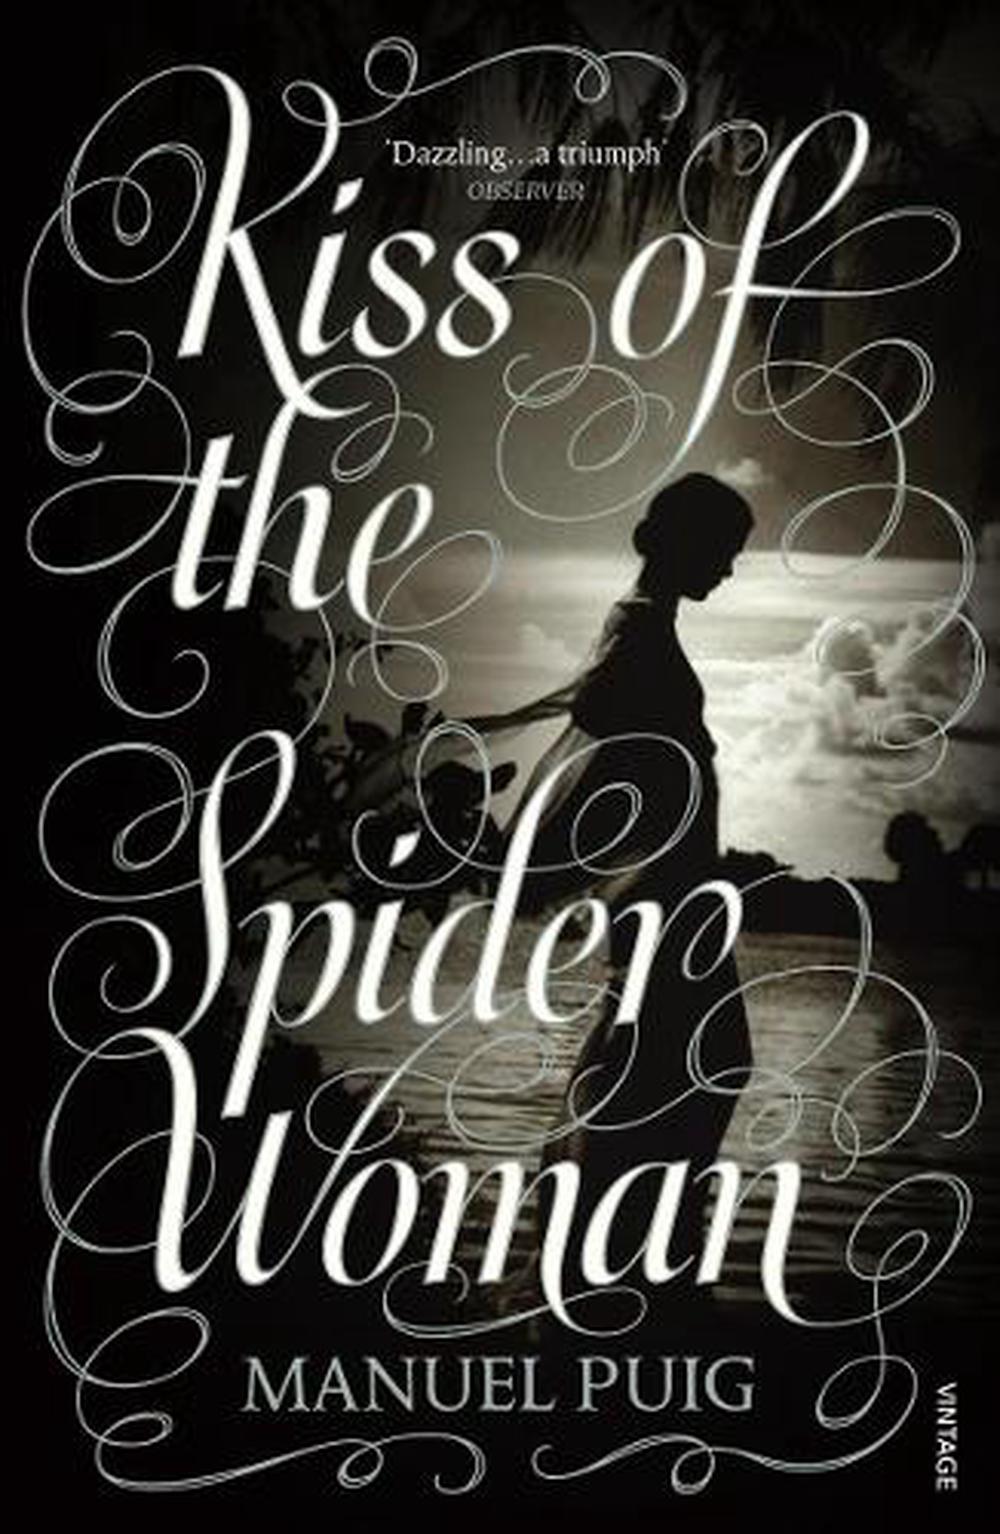 kiss of a spider woman book